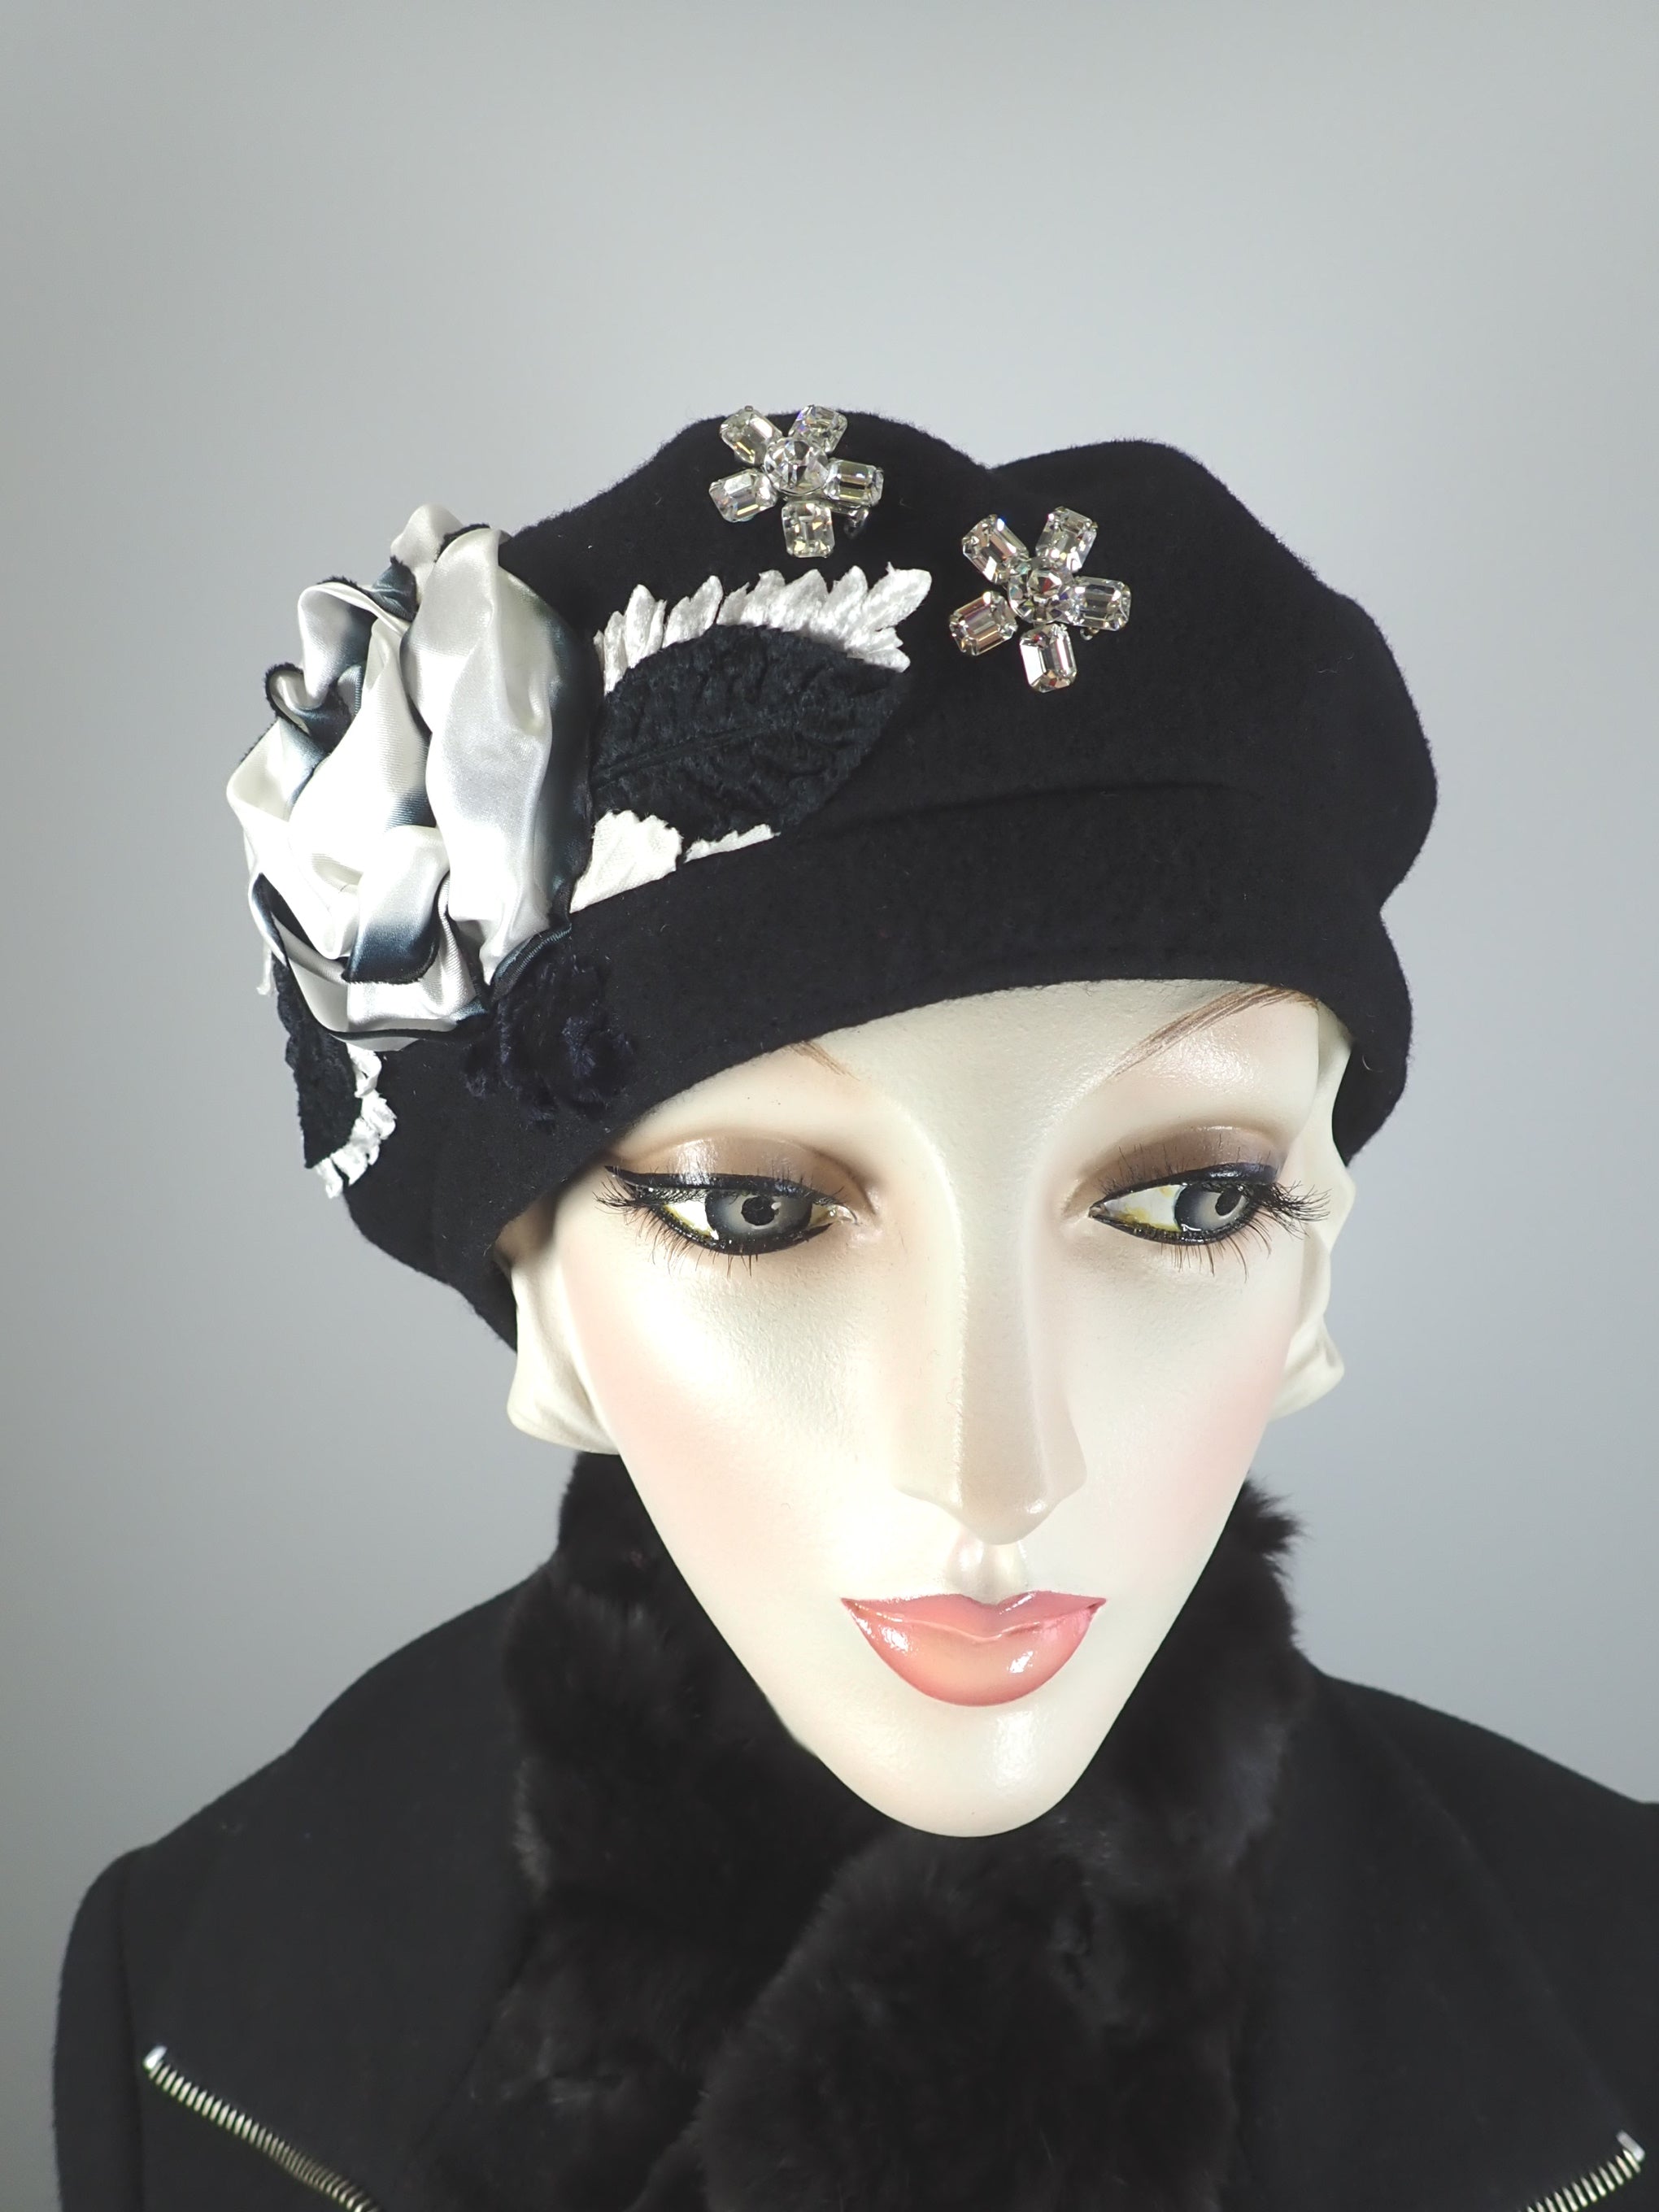 Women's winter wool felt black and white beret. Upcycled sustainable womens beret hat. Hand embellished one of a kind hat.